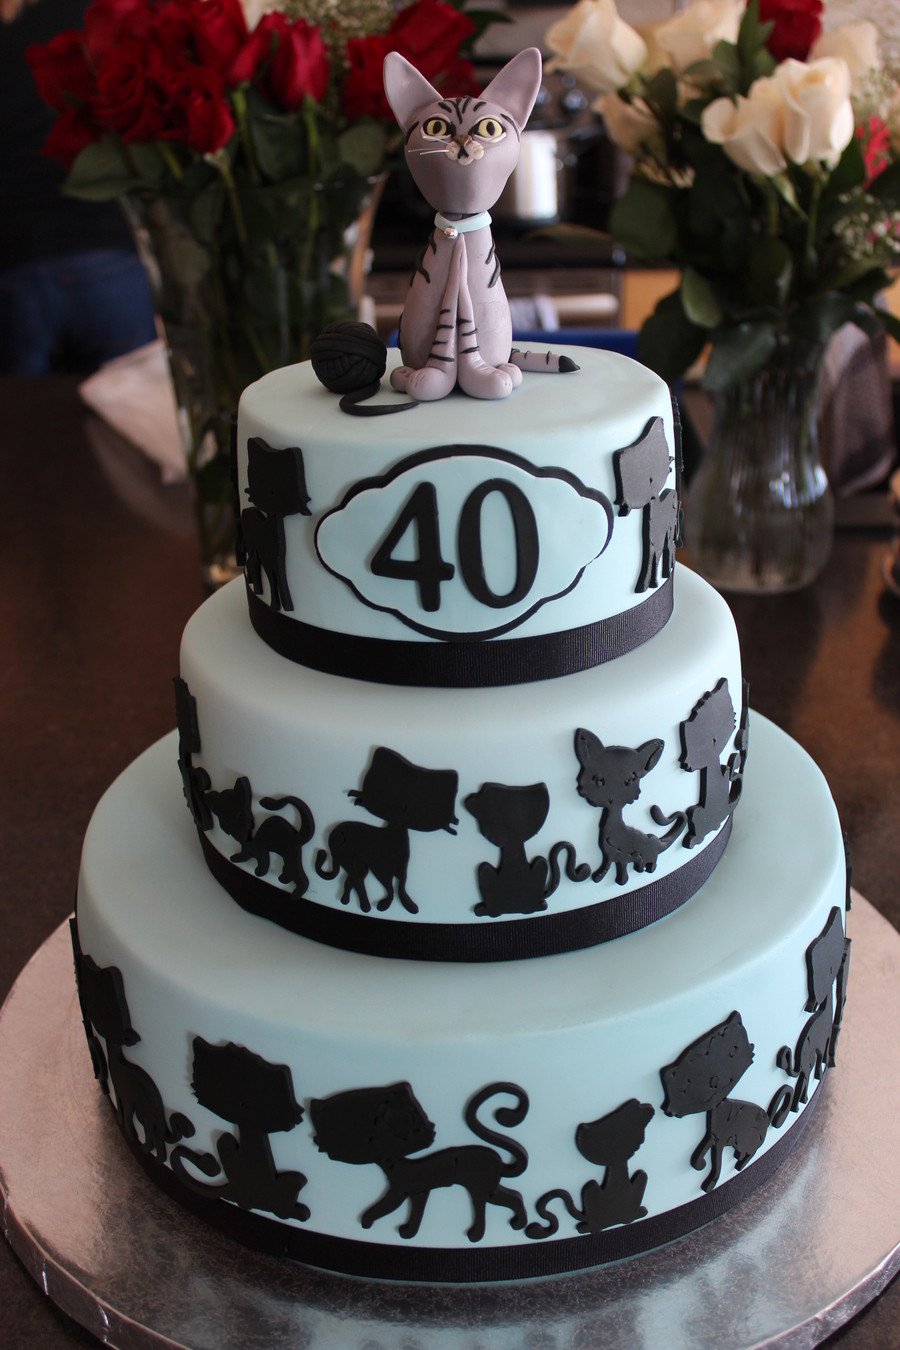 40 Birthday Cakes
 40Th Birthday Cake Client Requested That The Cake Have 40